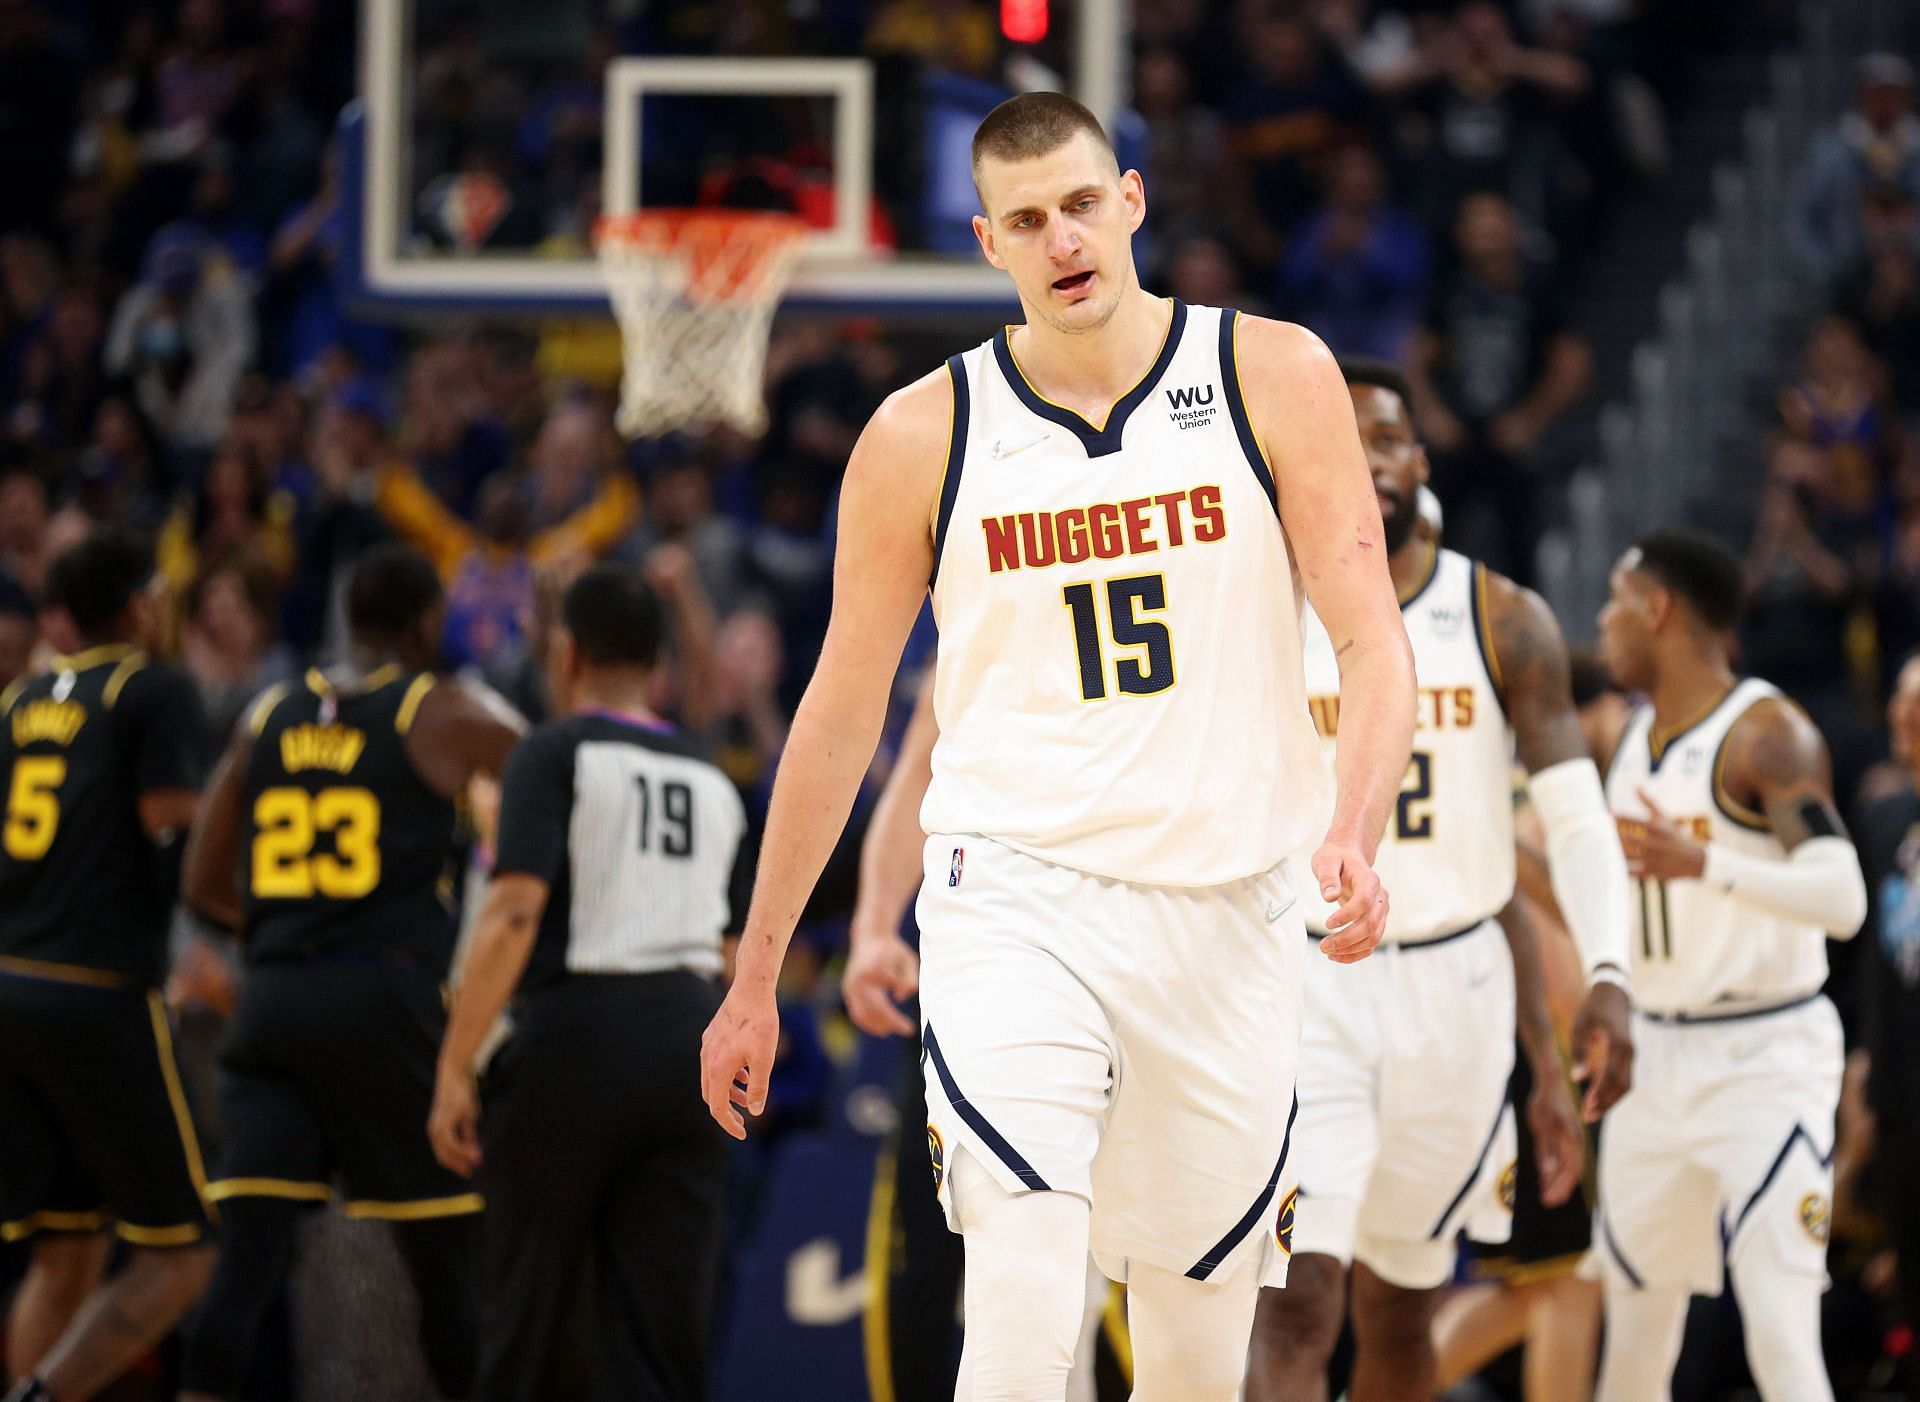 While Joel Embiid and Steph Curry campaigned, Nikola Jokic let his